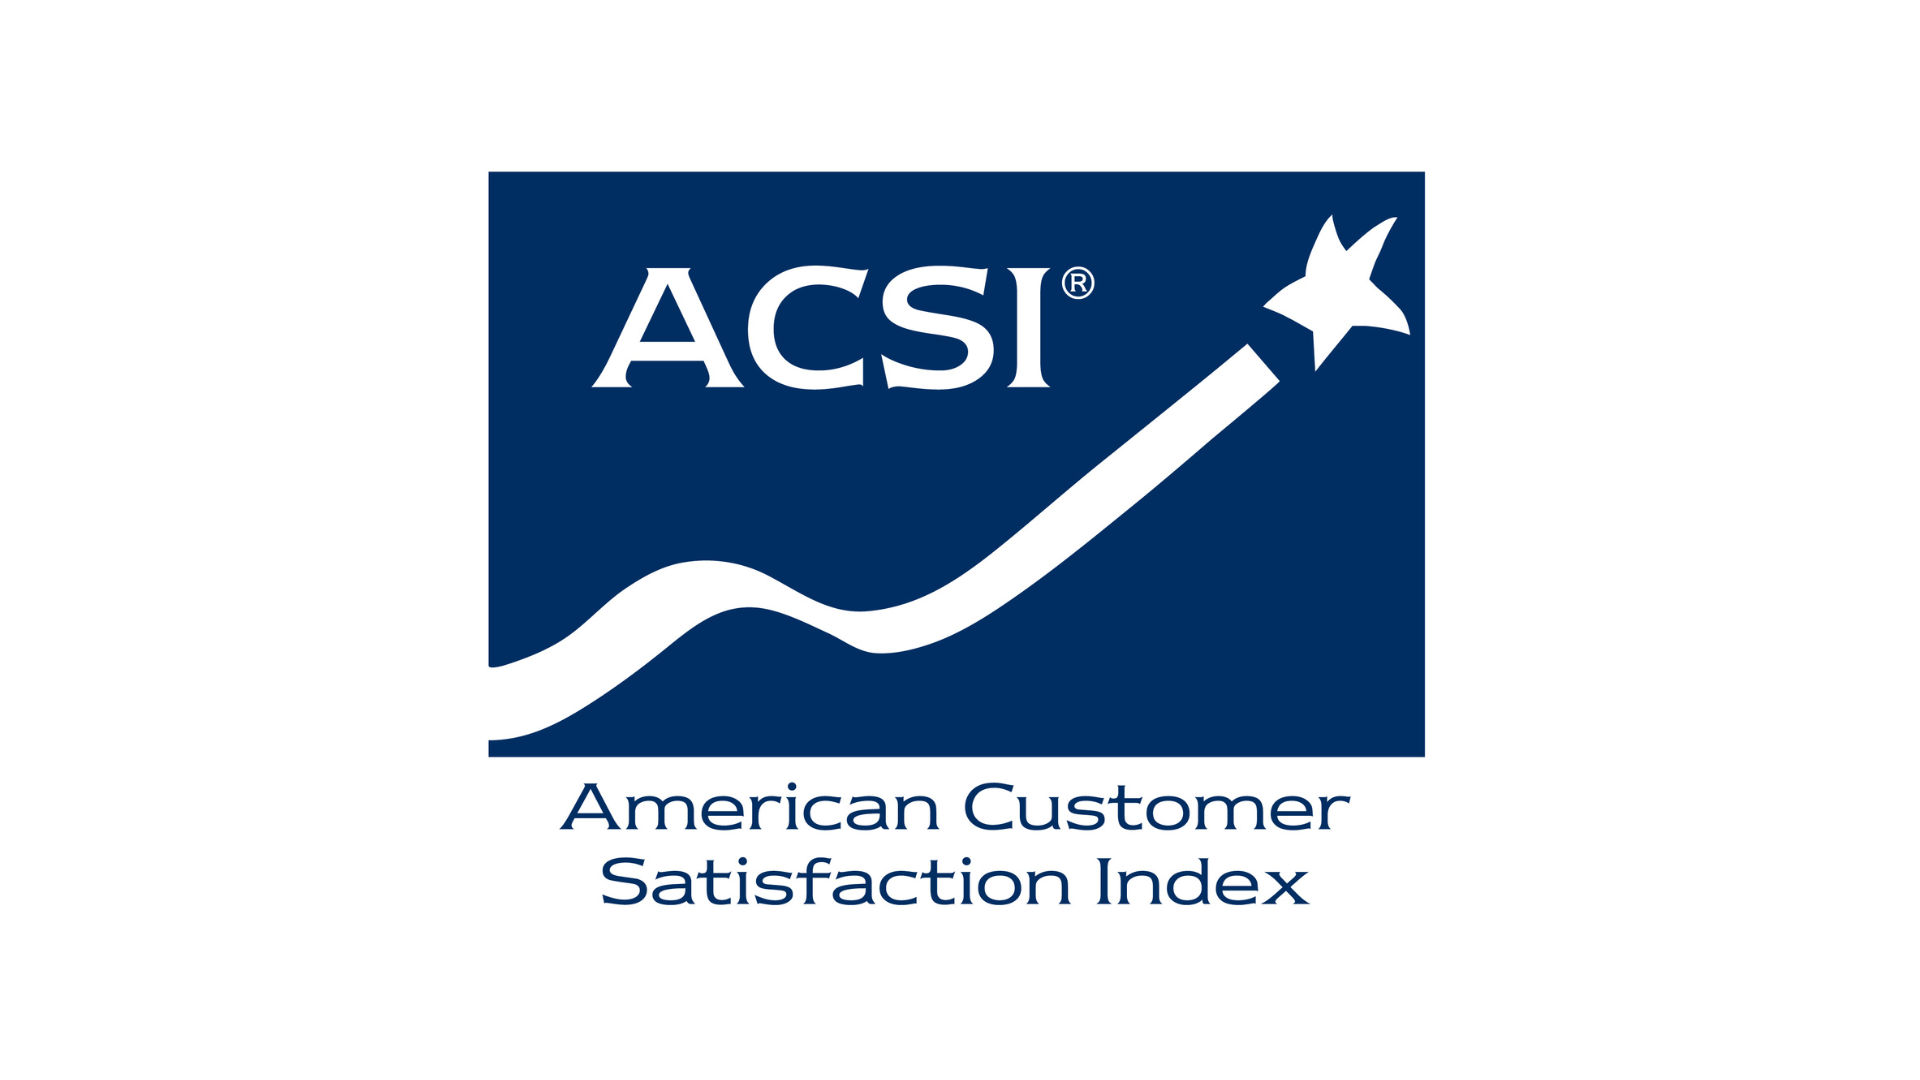 Samsung Earns Highest Ranks in Product and Service Quality for TV and Home Appliances by ACSI®